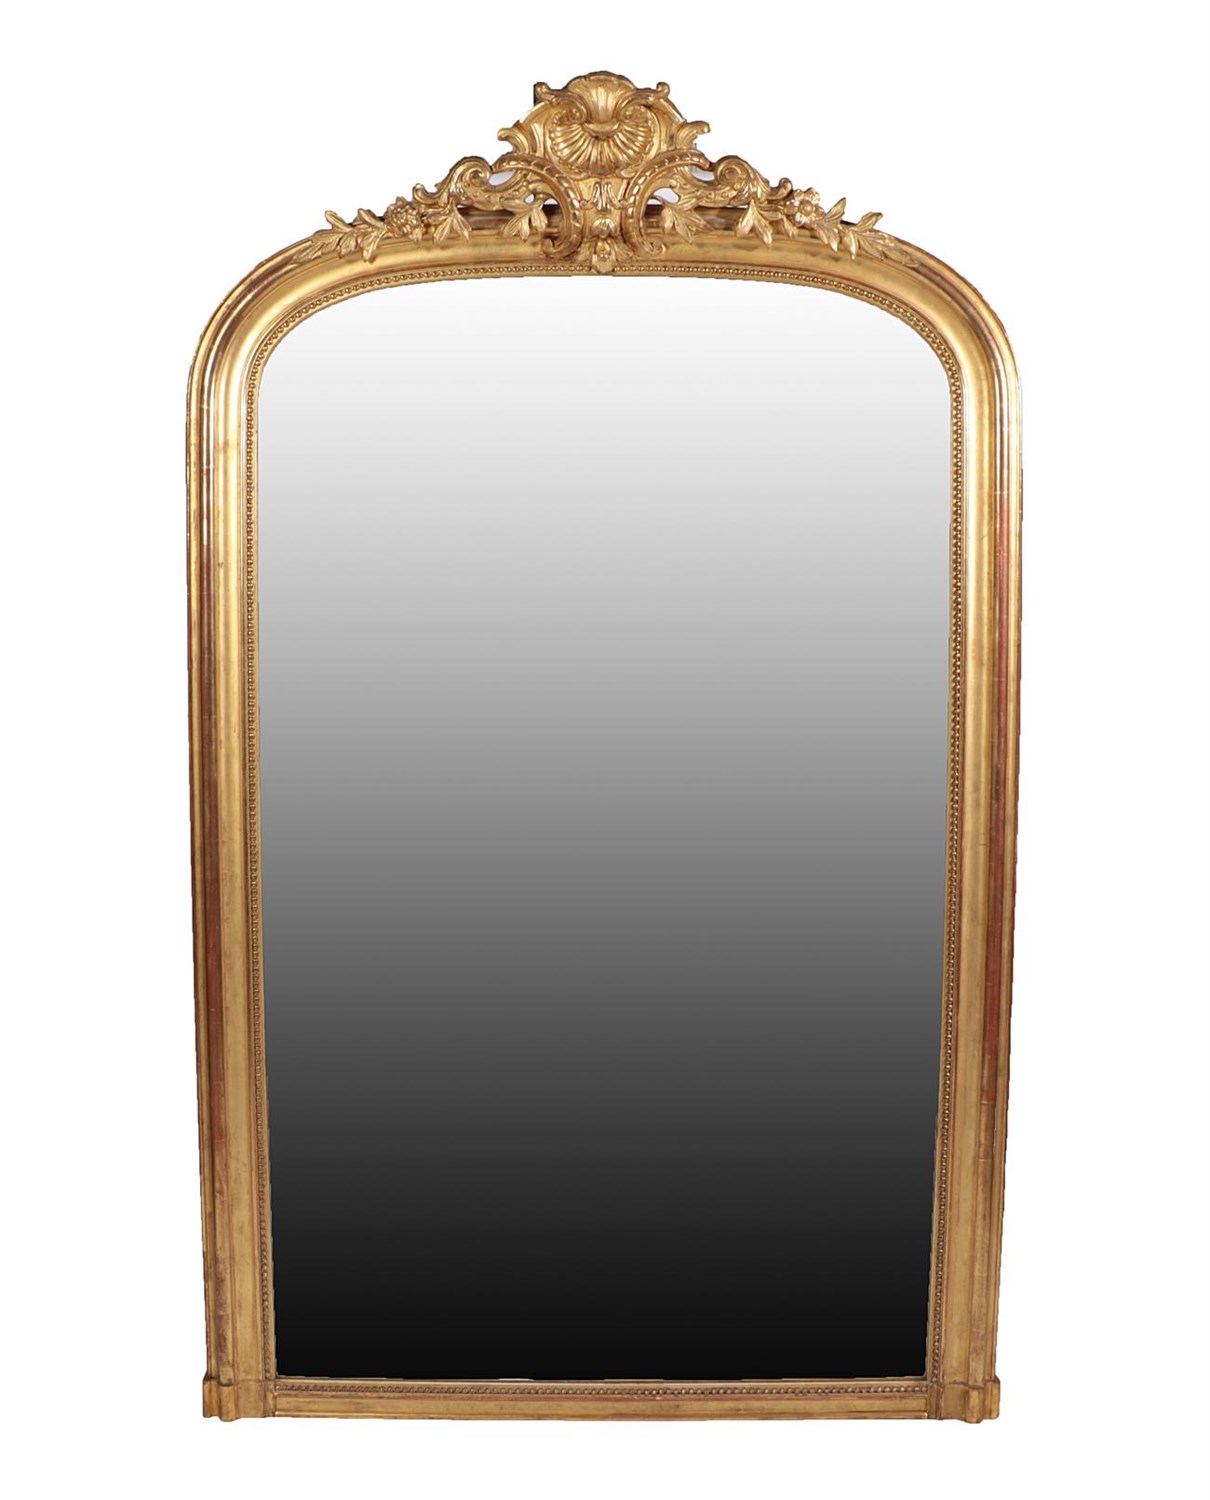 Lot 21 - A French Gilt and Gesso Overmantel Mirror, 3rd quarter 19th century, the beaded and moulded...